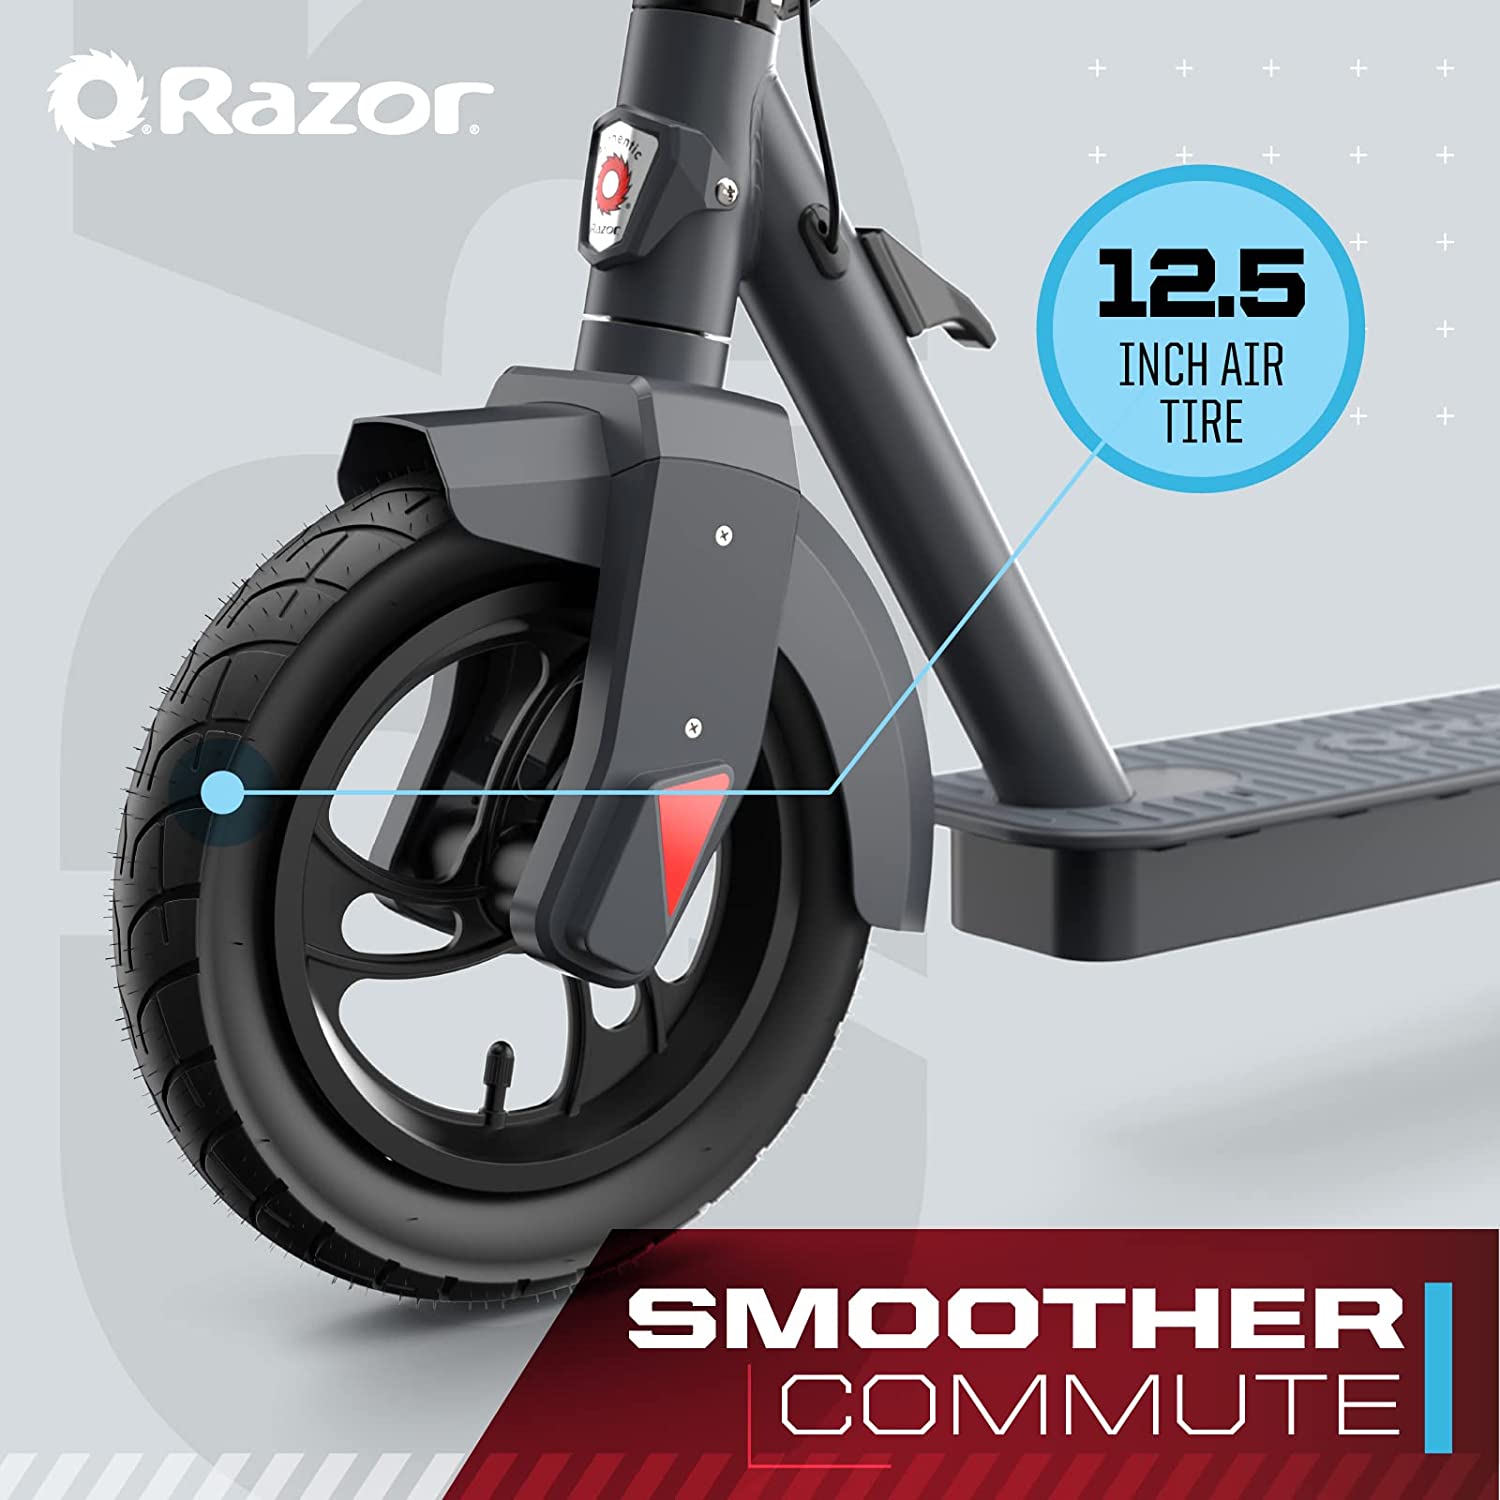 Razor, Razor C25 Commuter Folding Design Up to 18 mph and 18-mile range Electric Scooter New